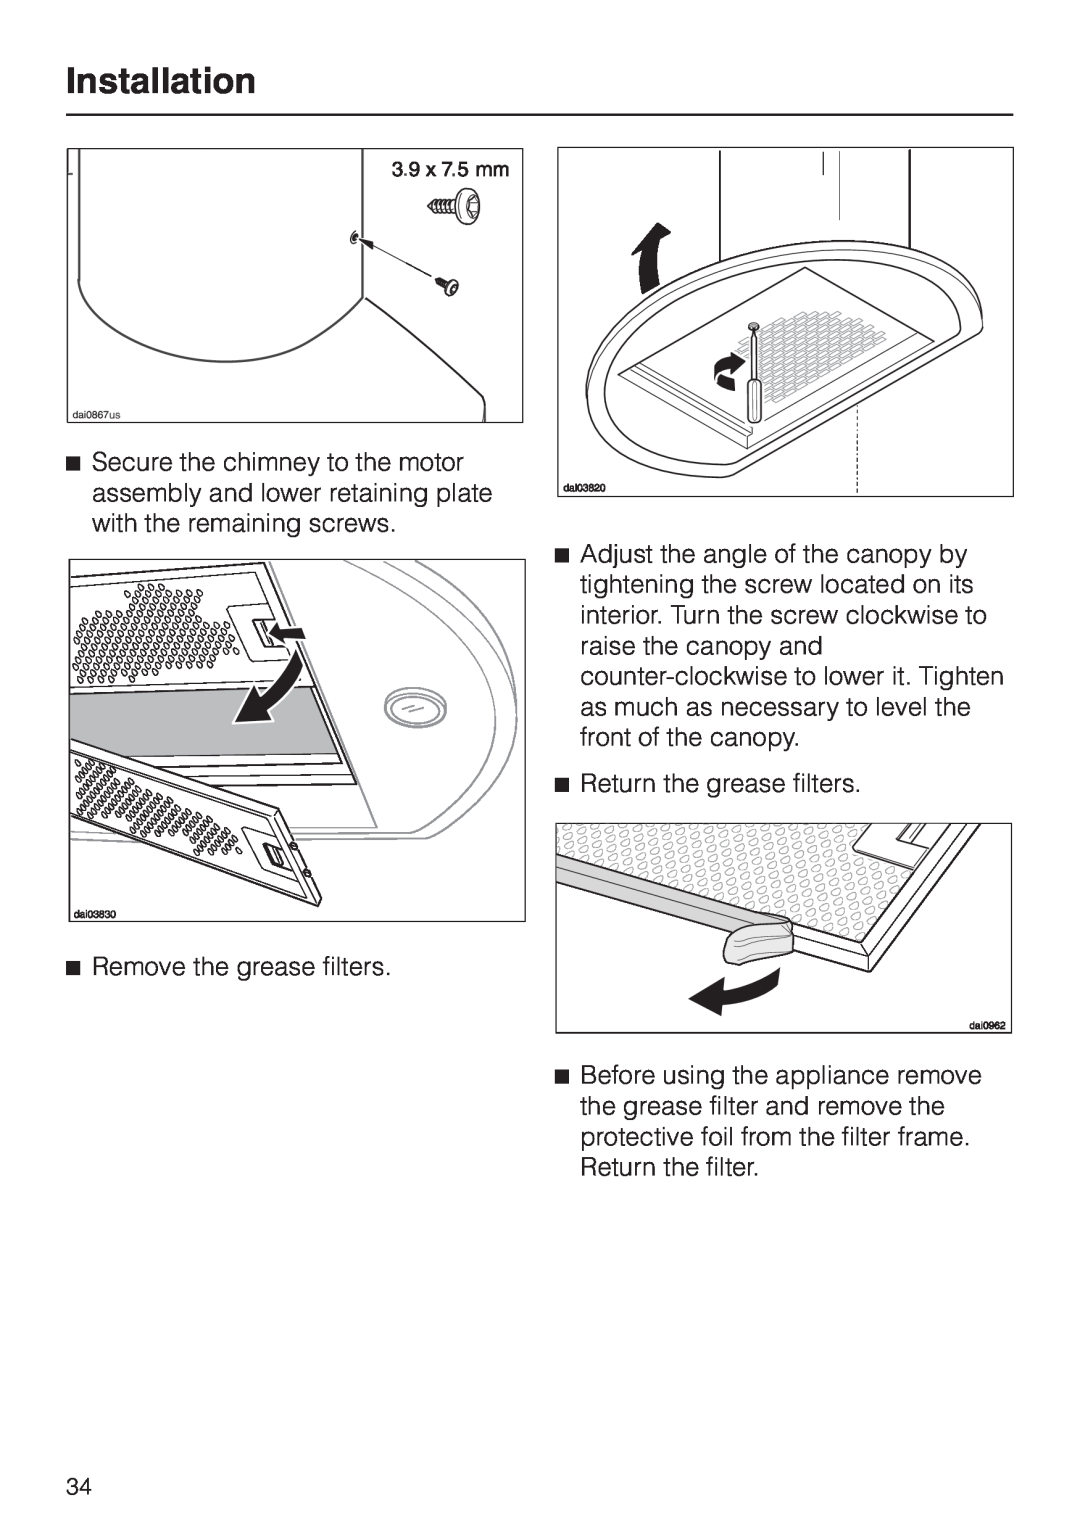 Miele DA239-3 installation instructions Installation, Return the grease filters 